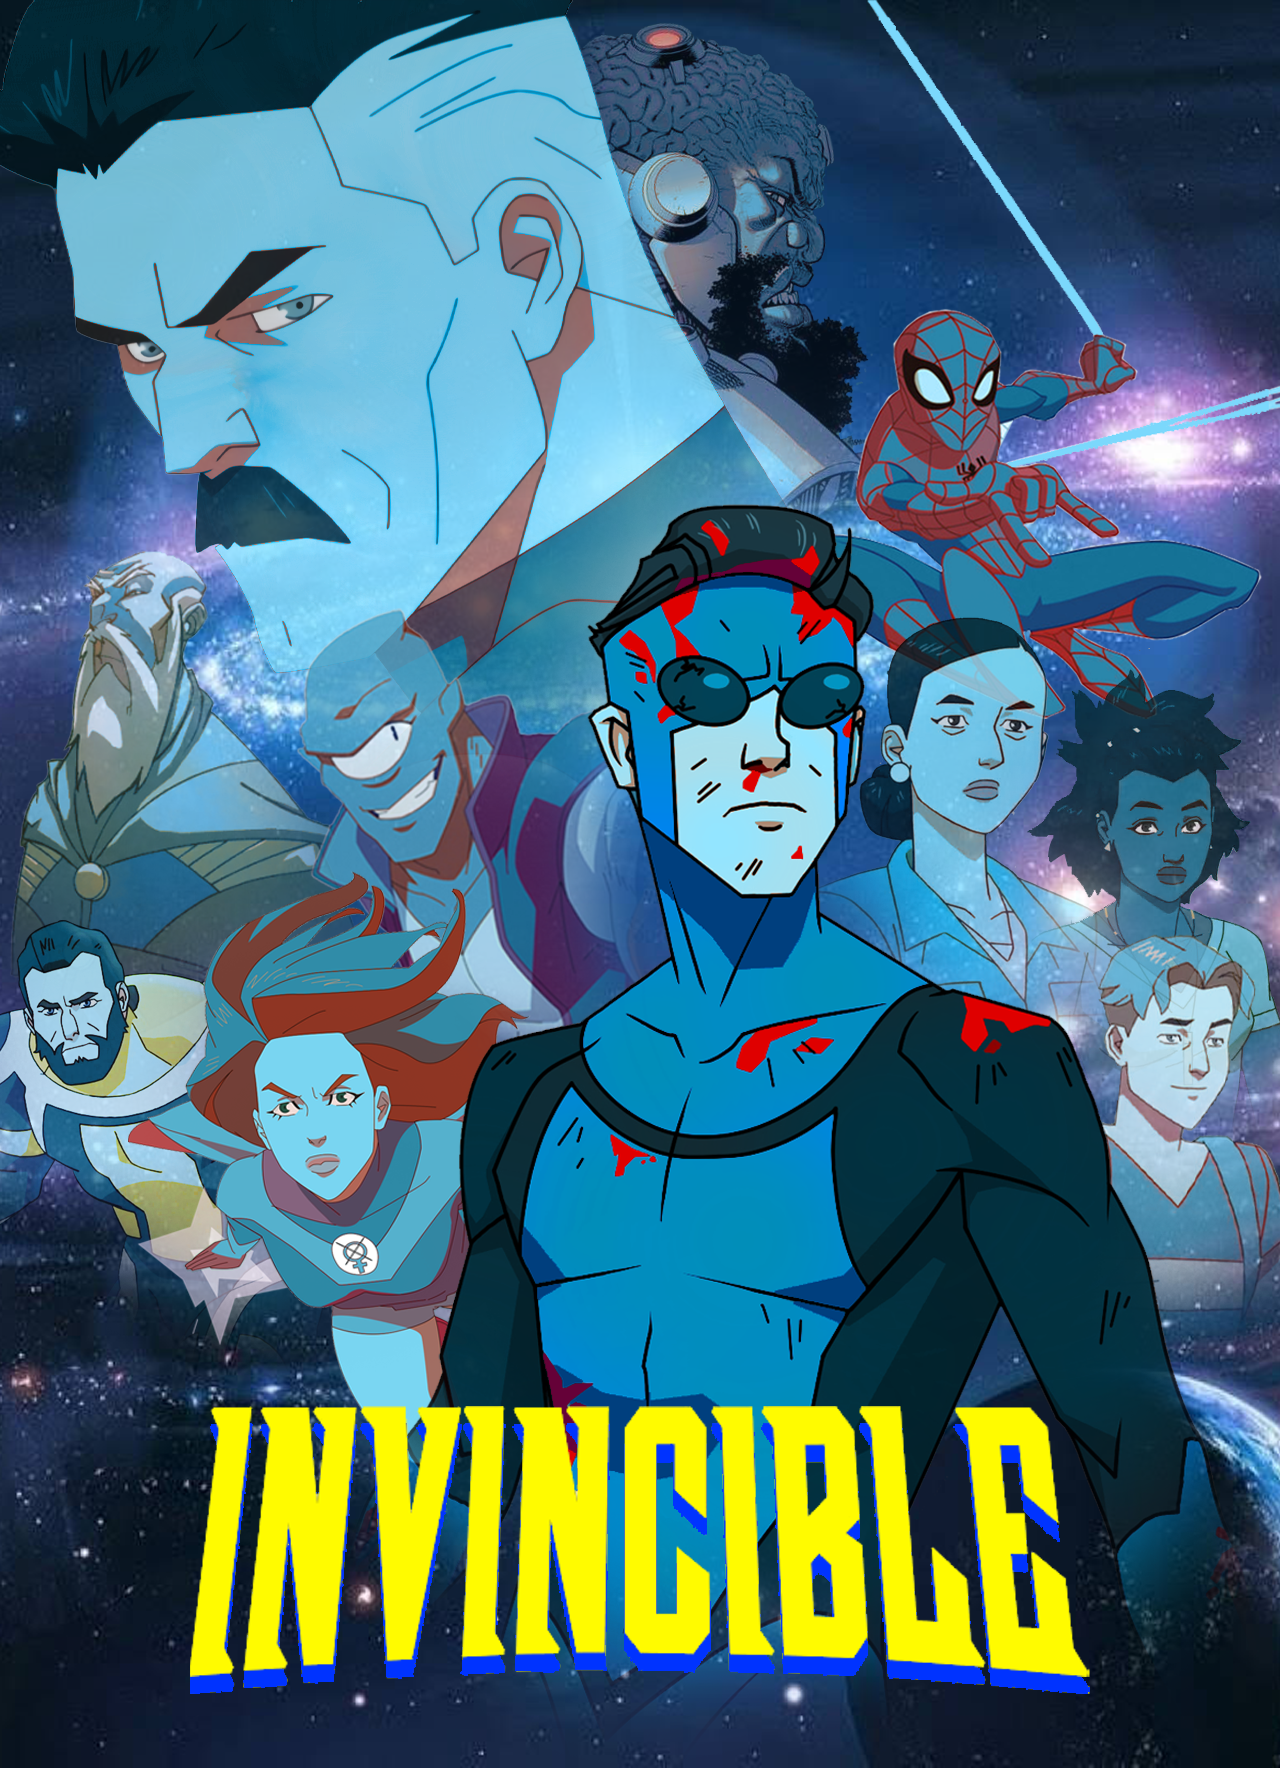 Invincible: Season 2 Exclusive Poster Revealed - IGN